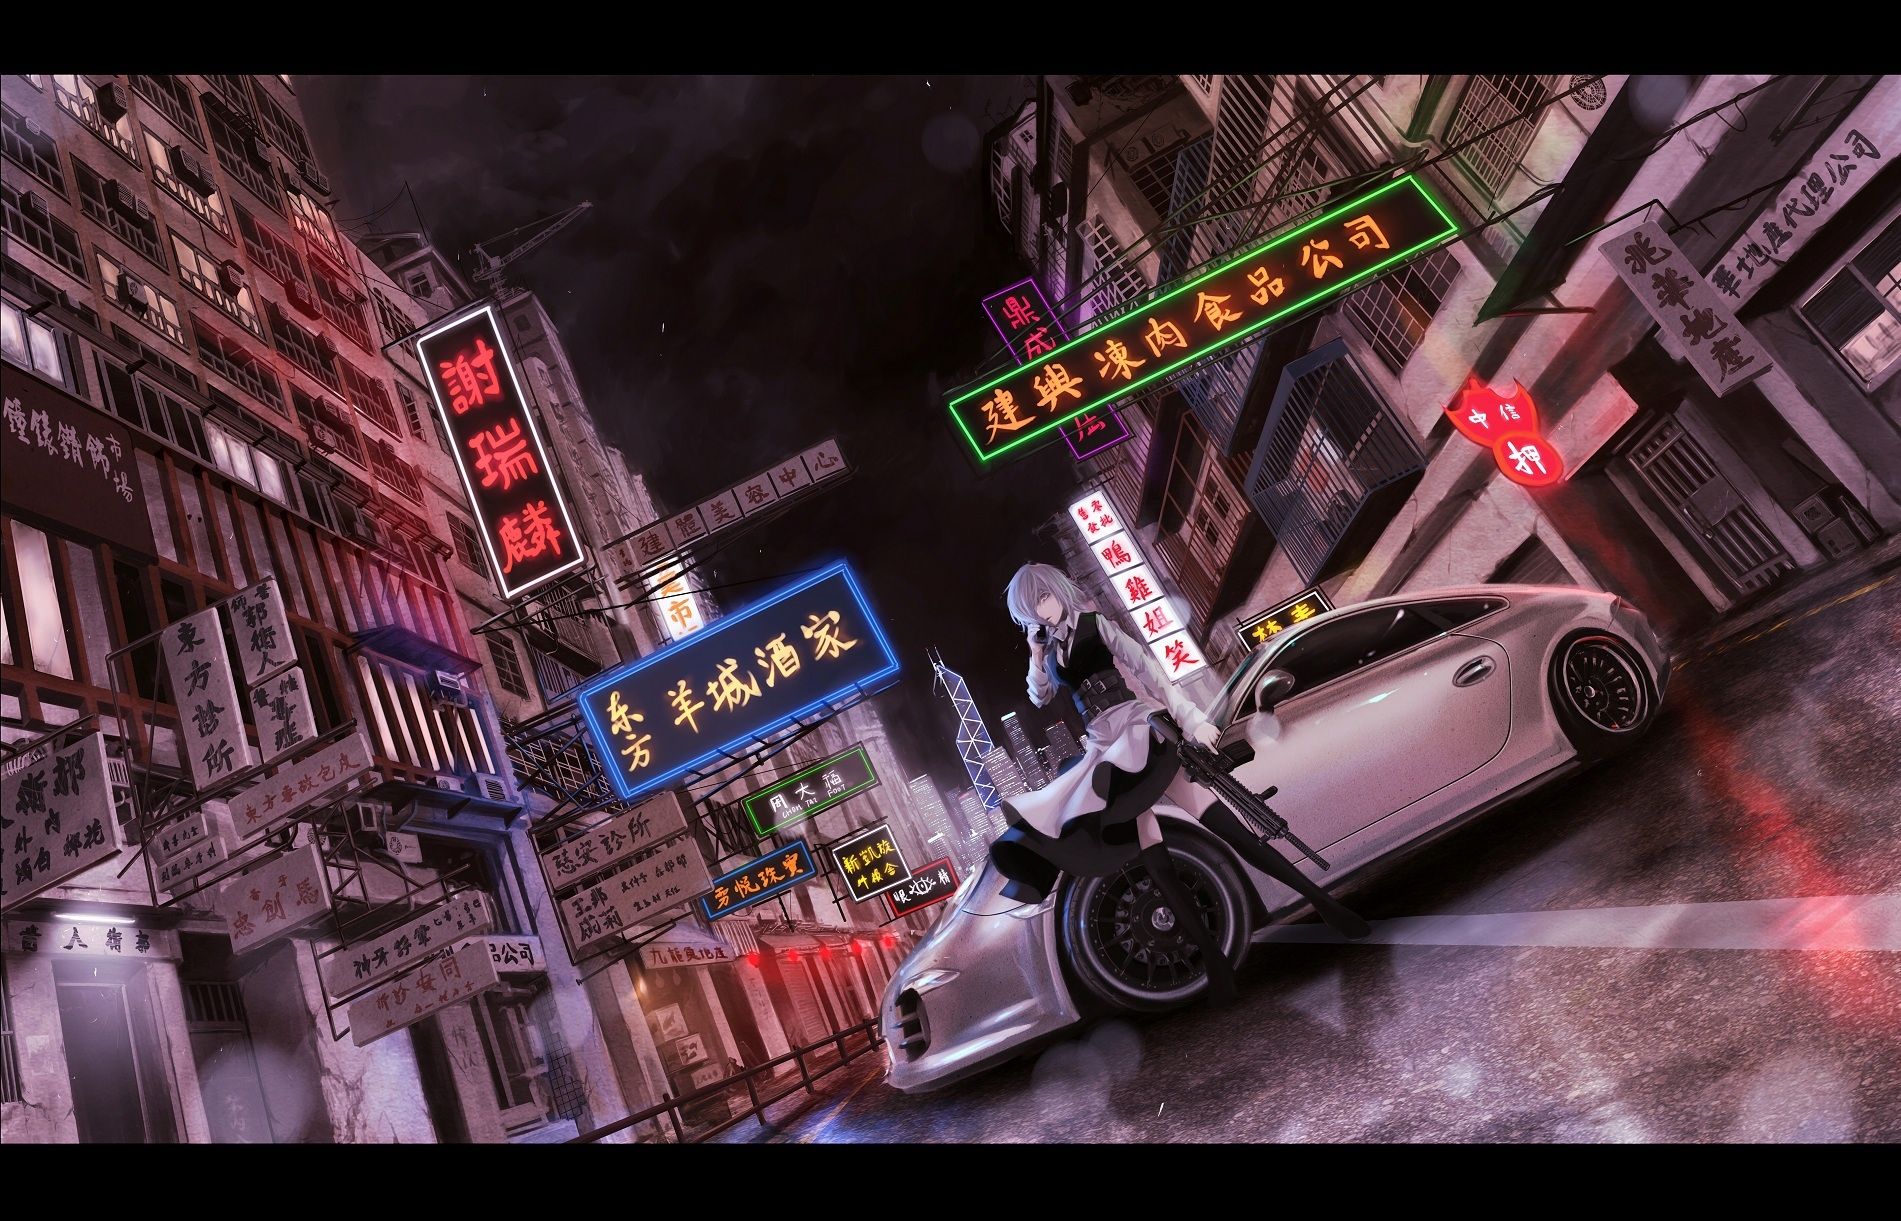 Anime girl standing on a sports car in a neon lit city - Cars